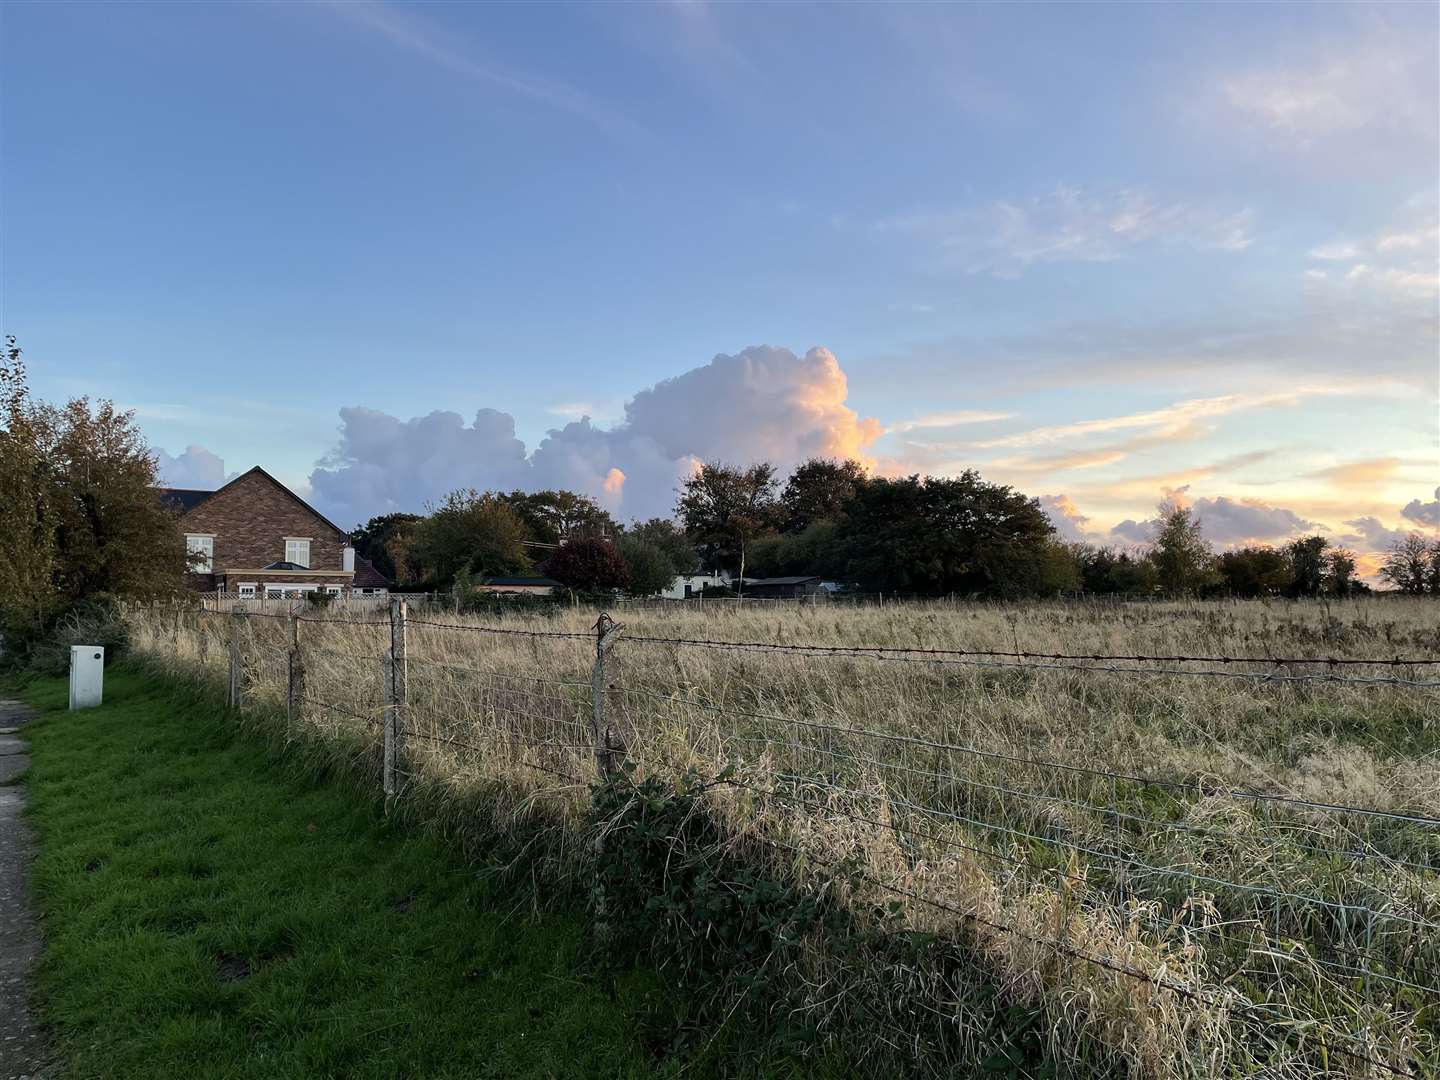 Richborough Estates Limited has reapplied for permission to build a new estate on land opposite Sholden Fields